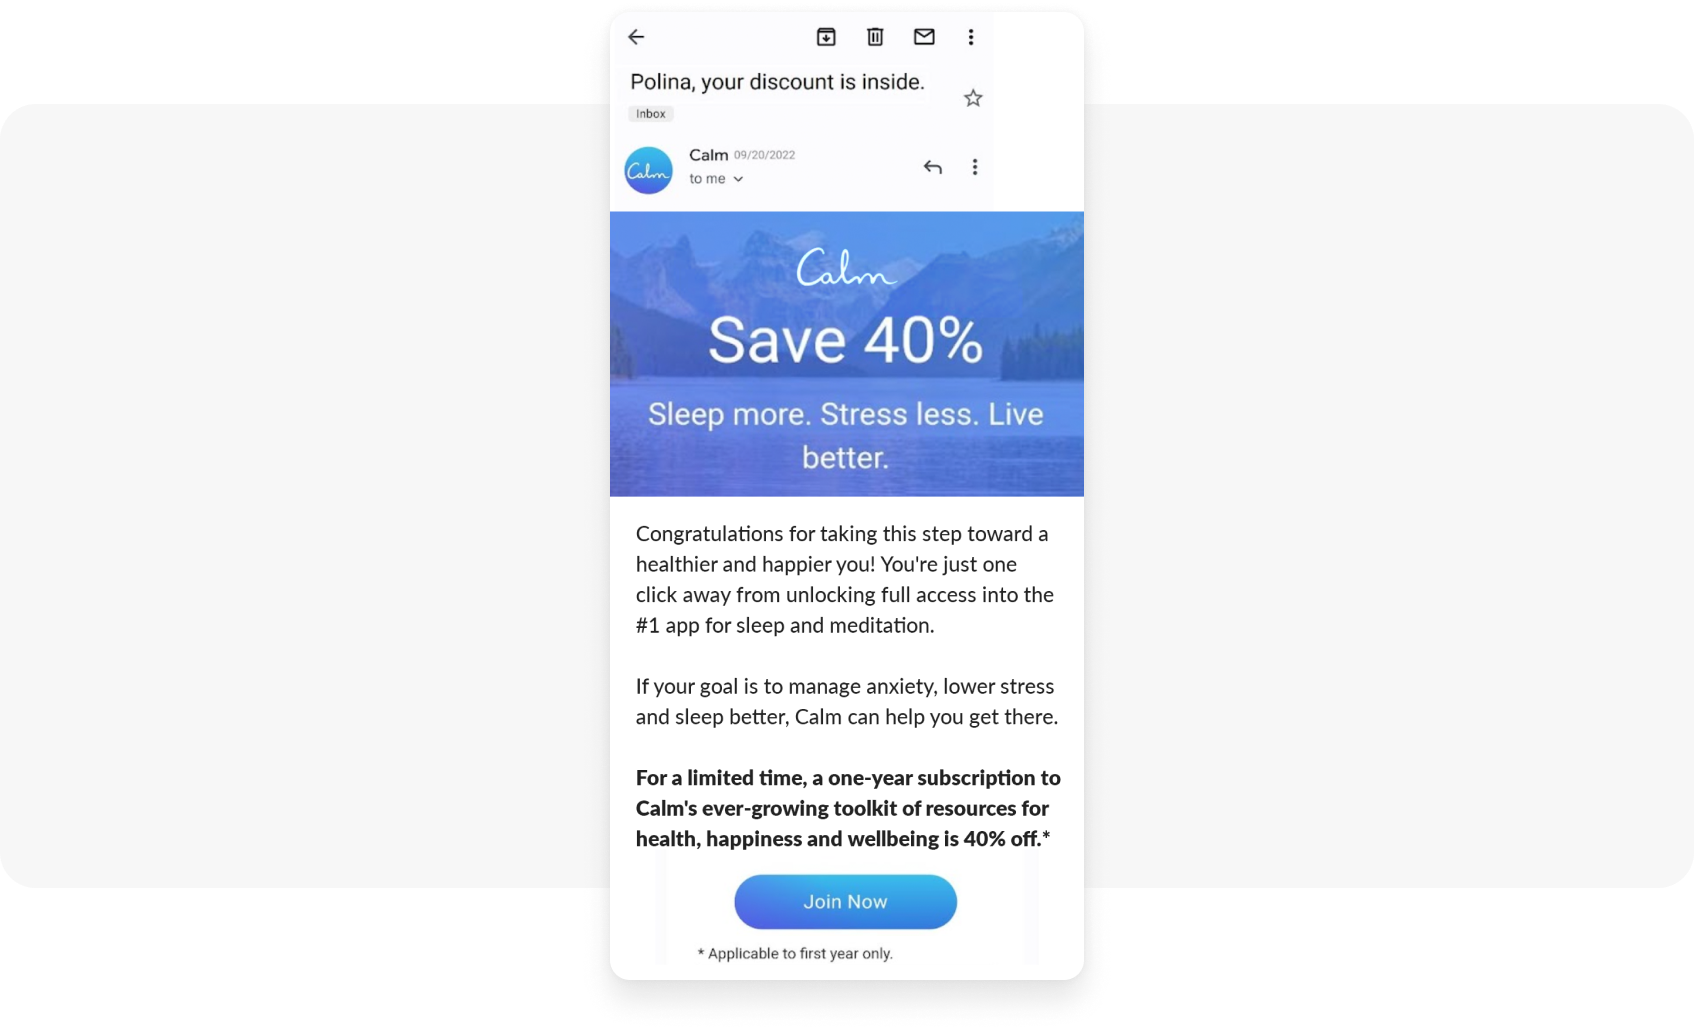 Special offer email from a meditation app